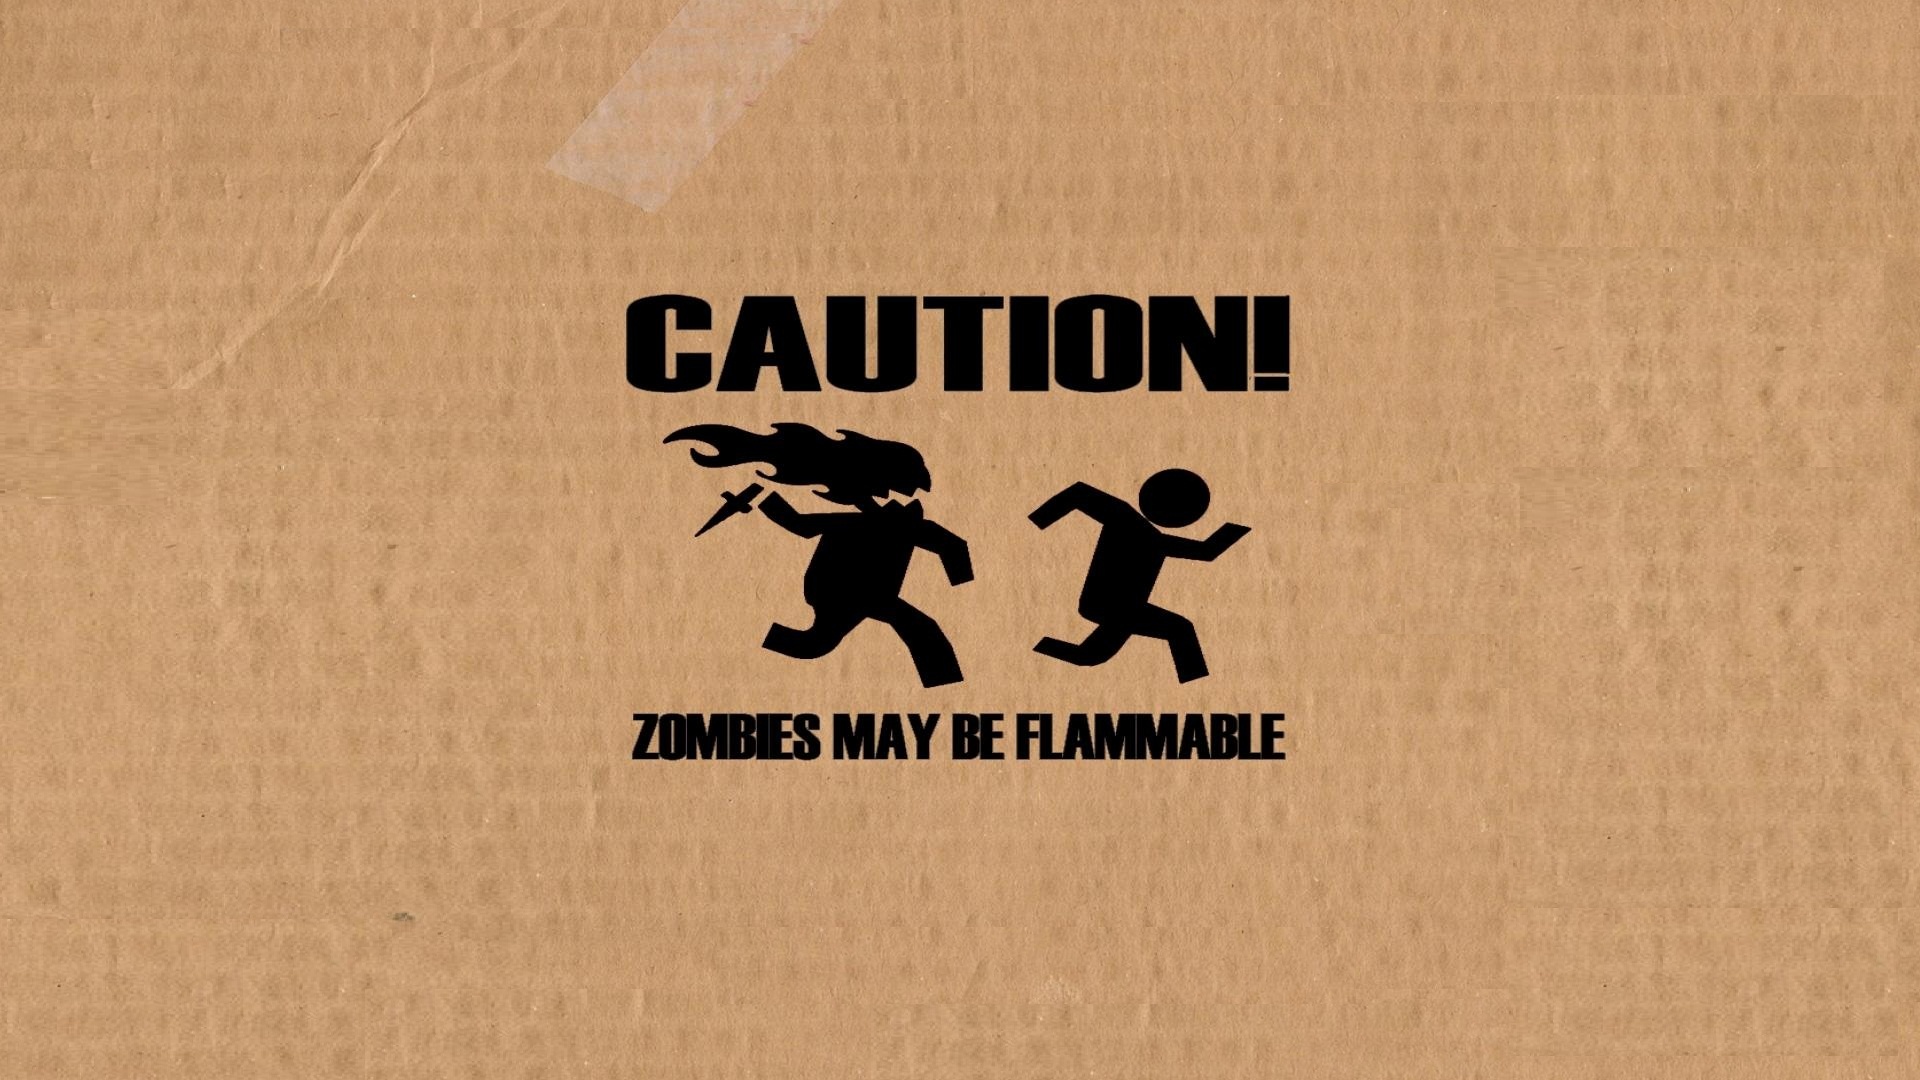 Wallpaper Funny Zombies Zombie Background Image